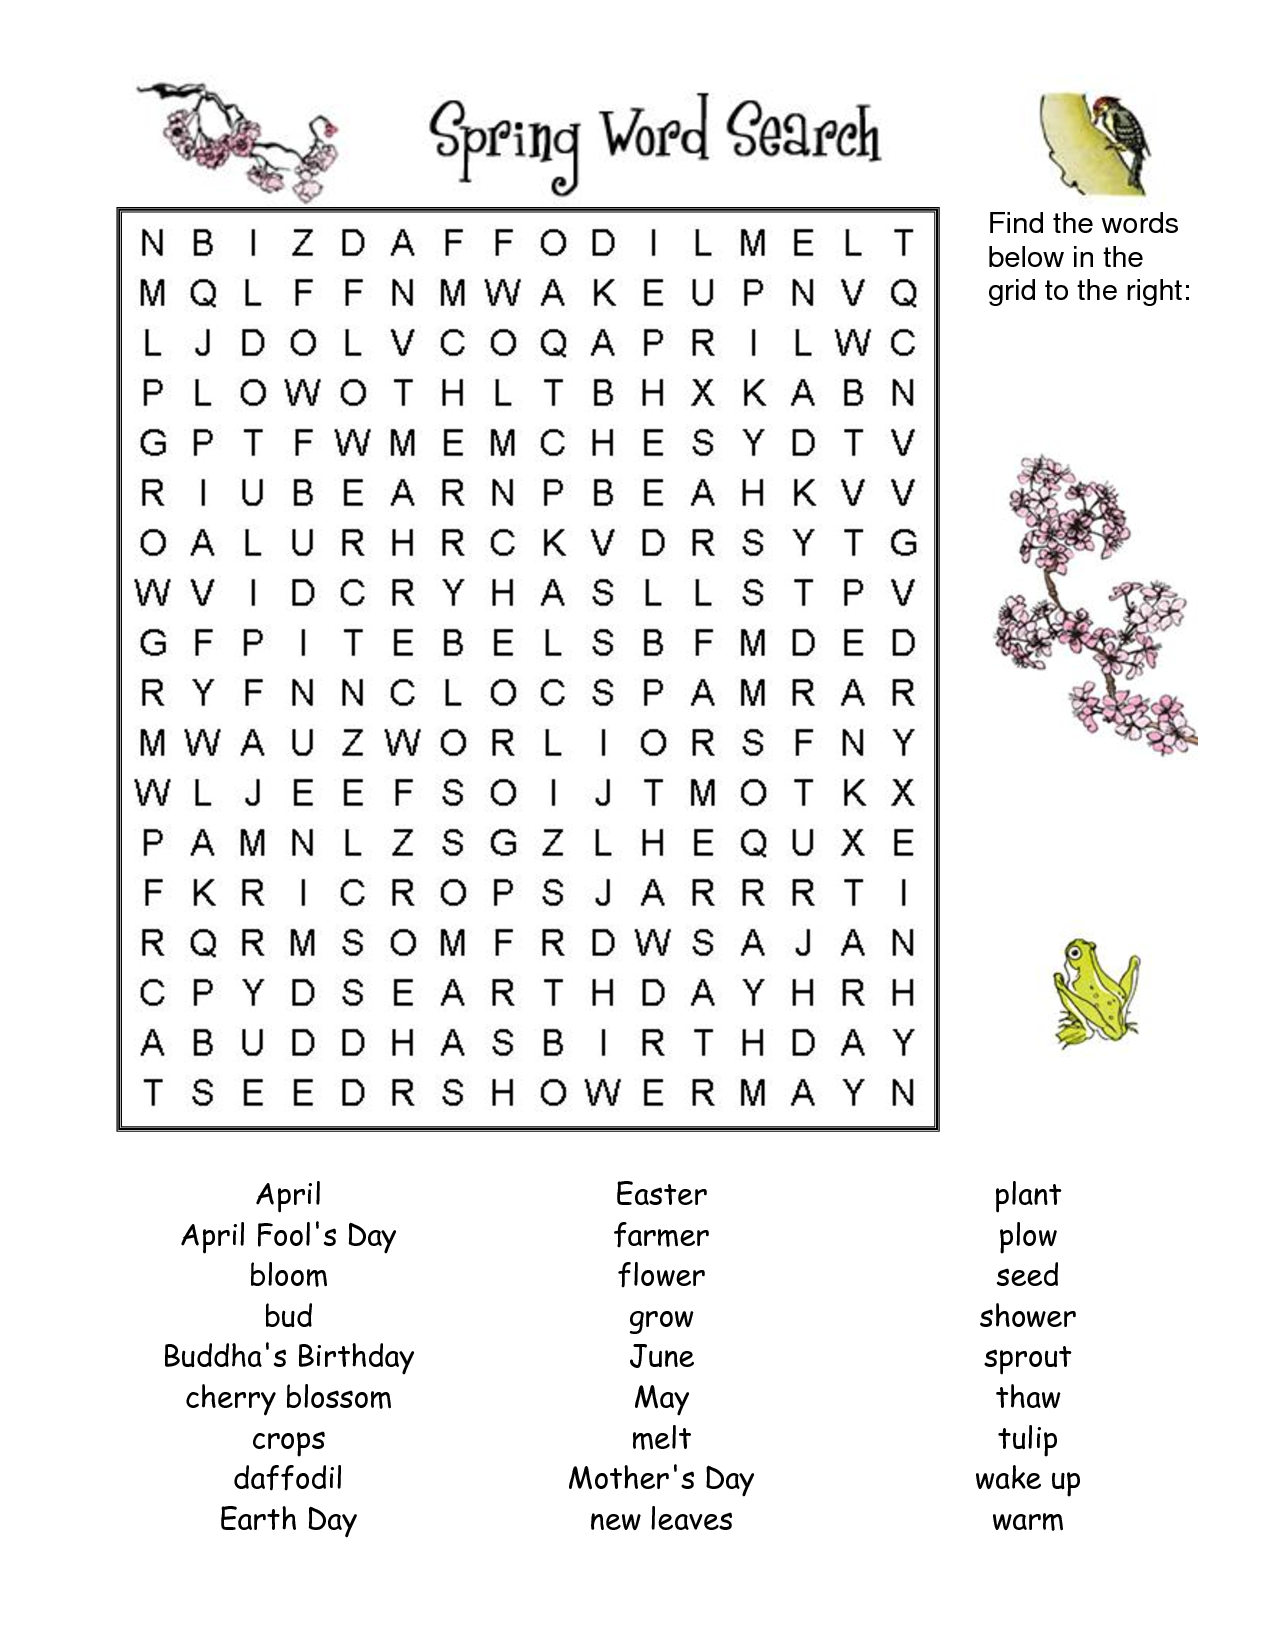 4-best-images-of-black-history-word-search-puzzle-printable-black-spring-word-search-best